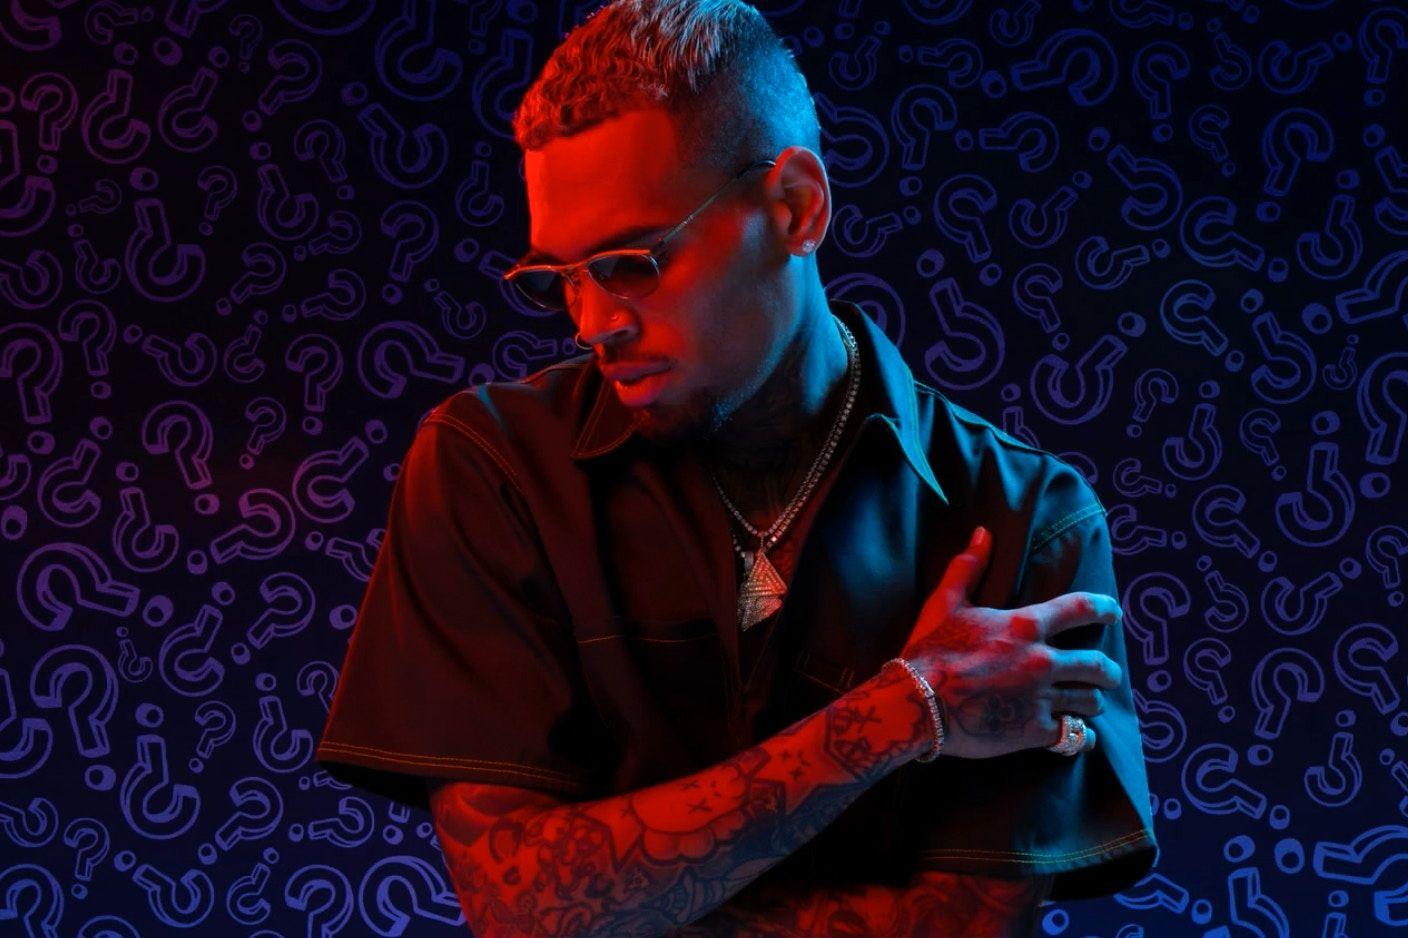 Stream Chris Brown's 45 Track Project 'Heartbreak on a Full Moon